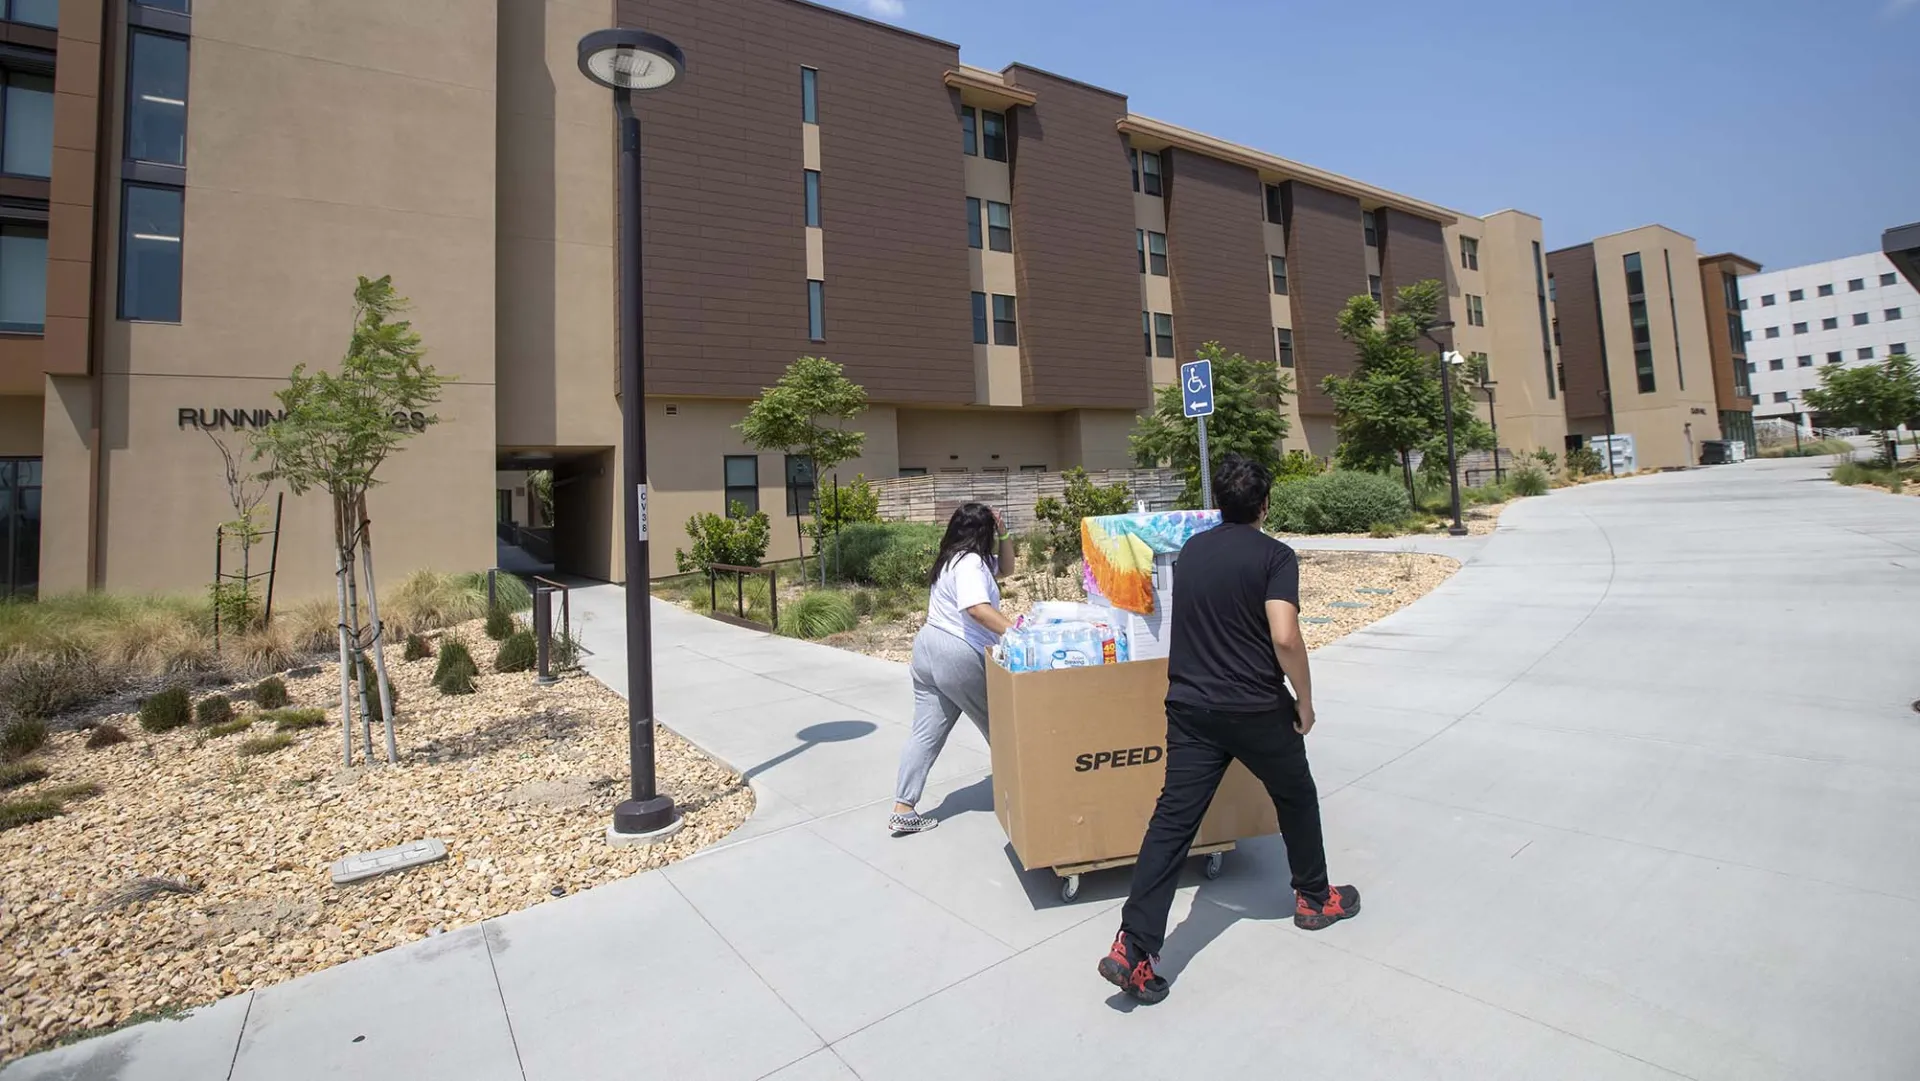 Move-in day photo of two people pushing a cart in front of a CSUSB dorm.